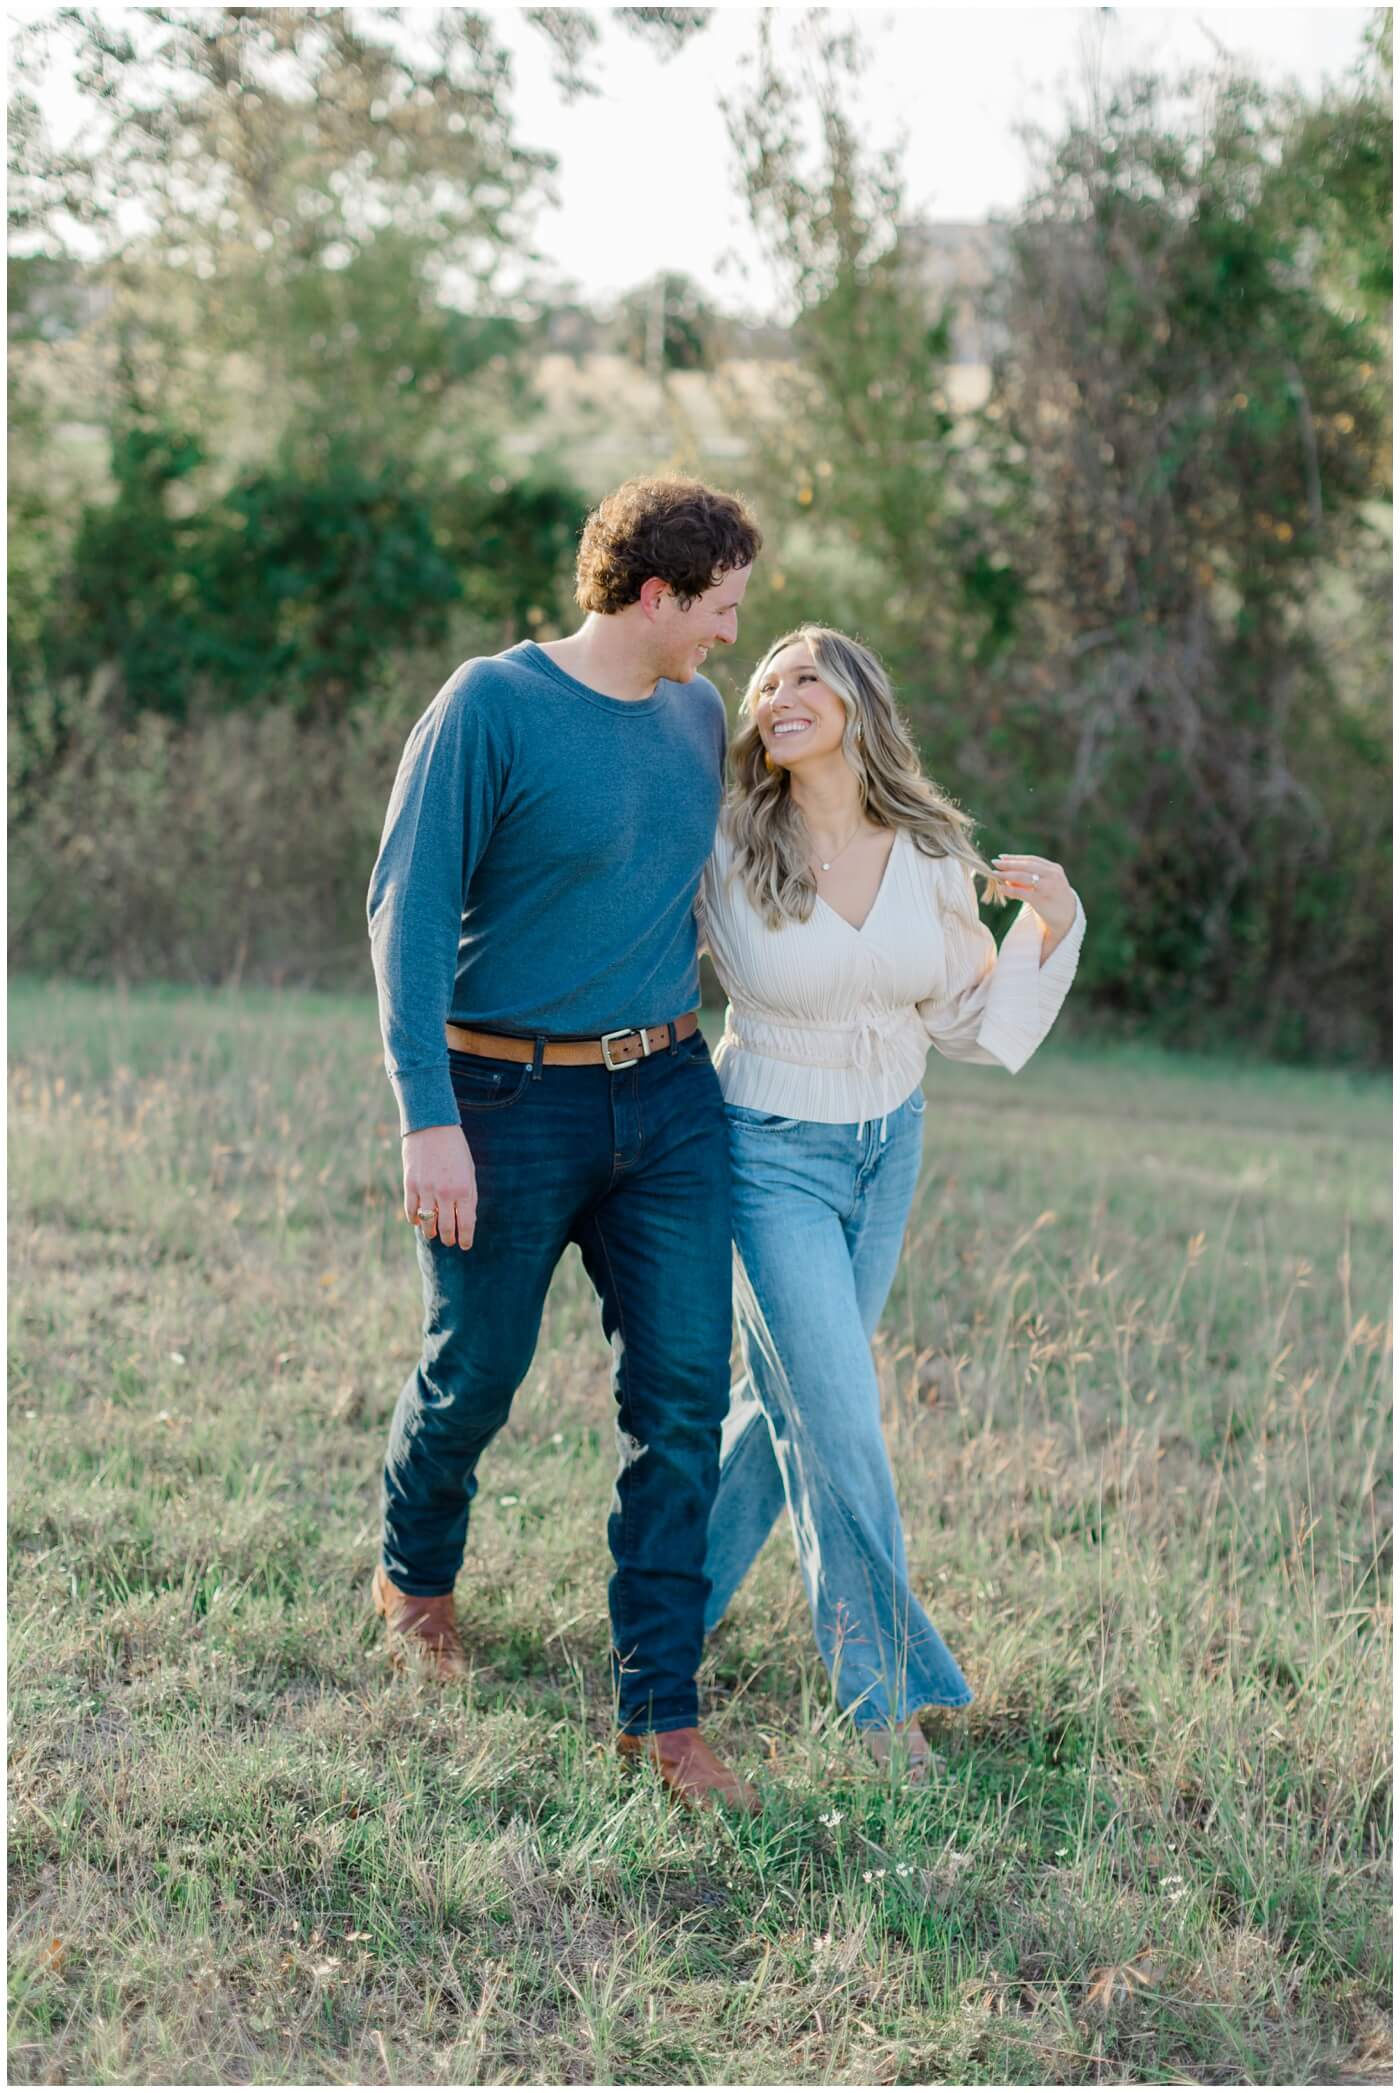 A couple walk together during their engagement session in Houston